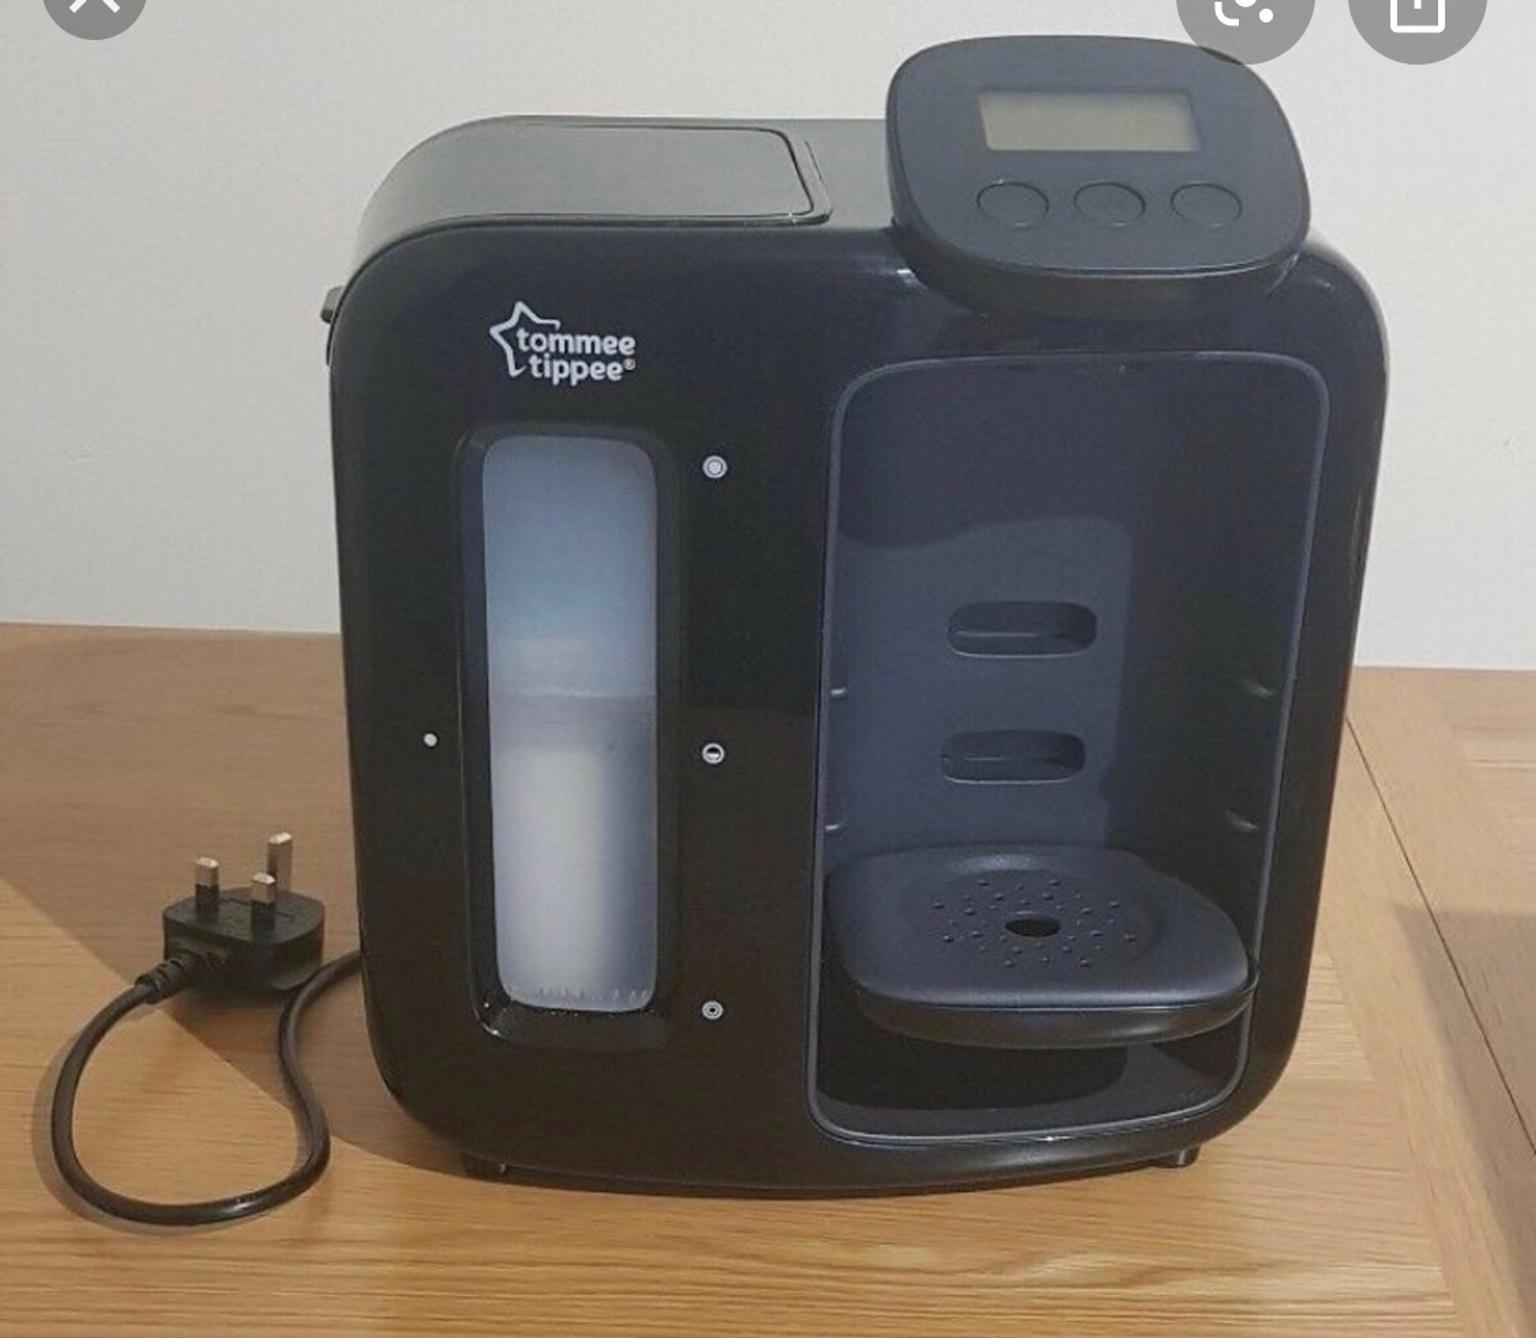 tommee tippee day and night prep machine sale